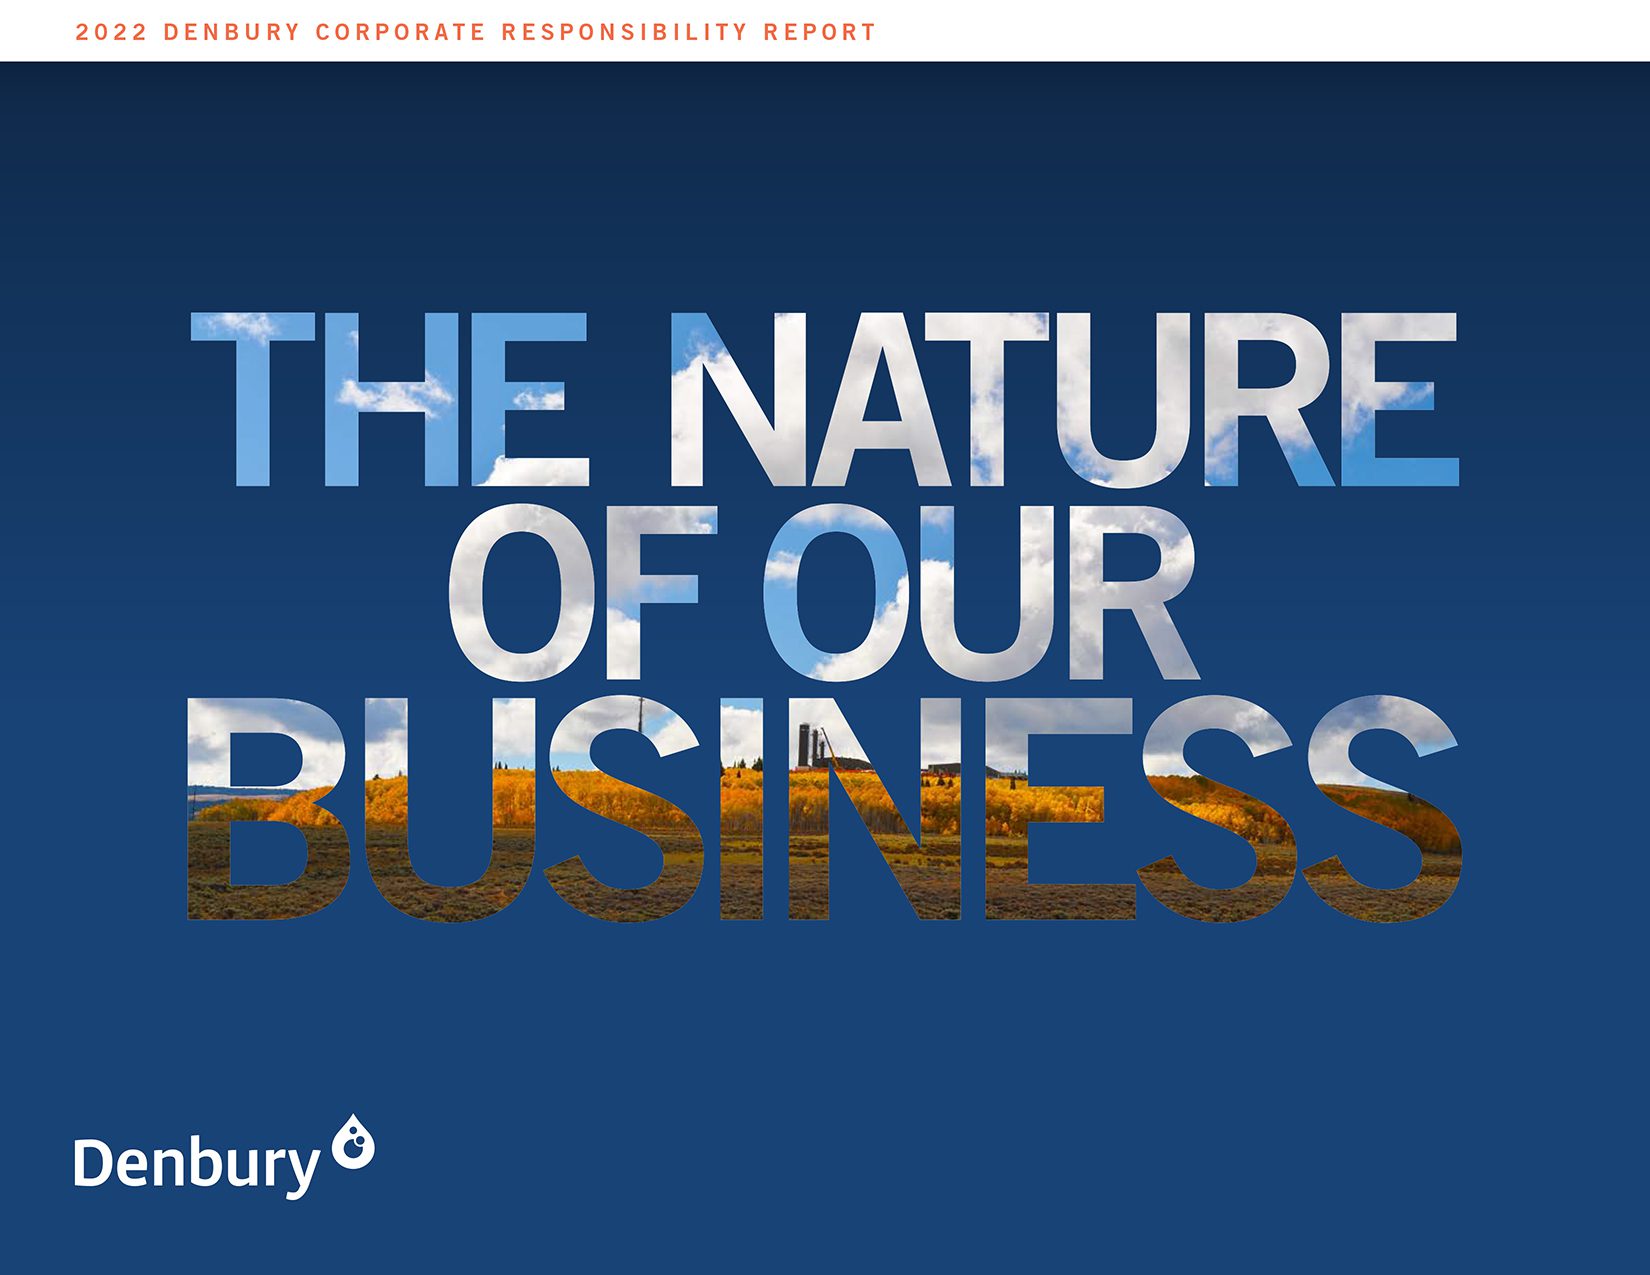 For more information on how Denbury is managing our environmental footprint, see our 2022 Corporate Responsibility Report.